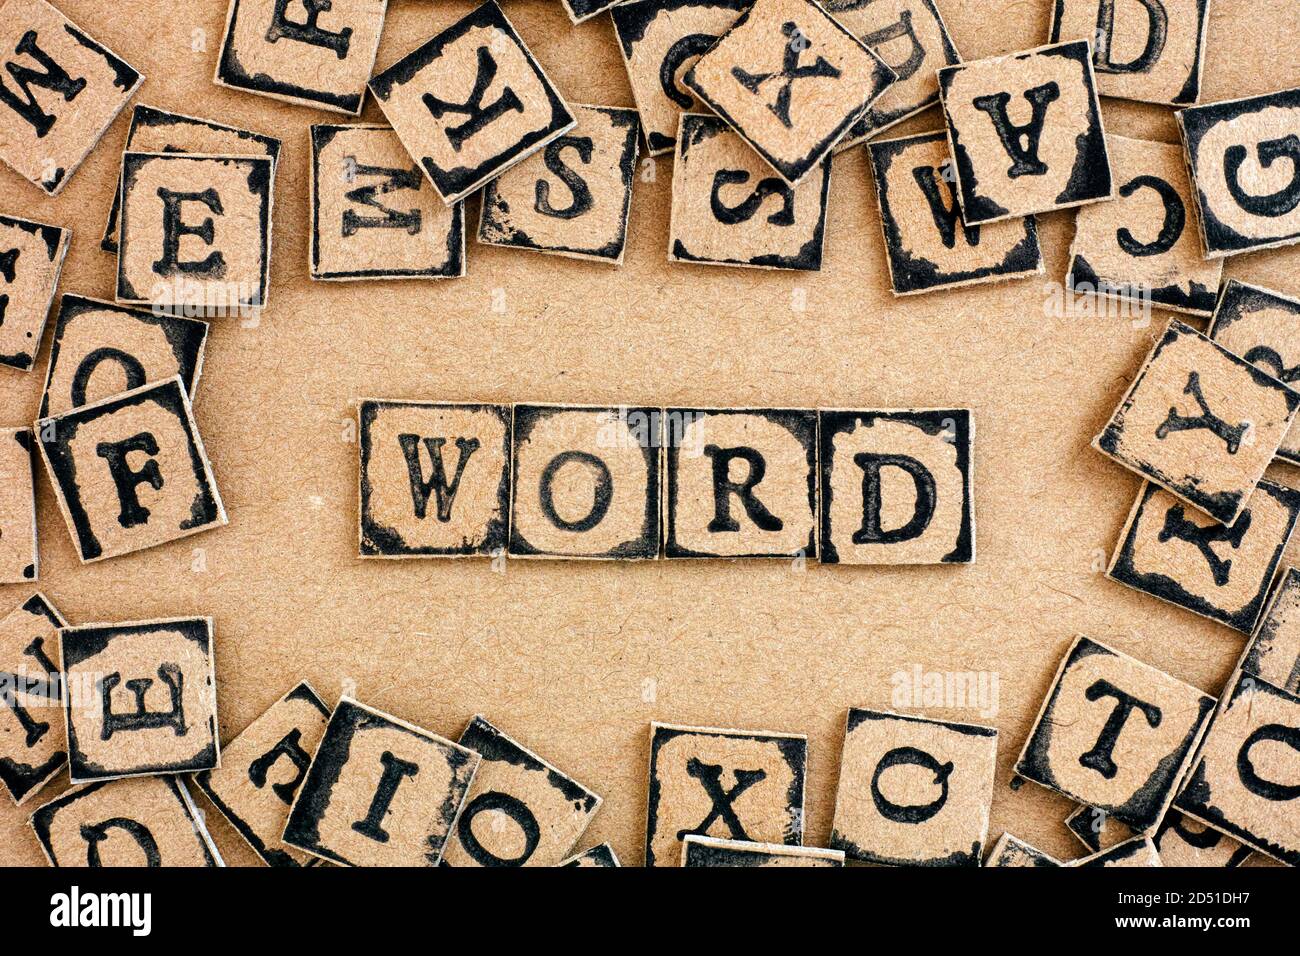 Text Word spelled out from cardboard letters made by black